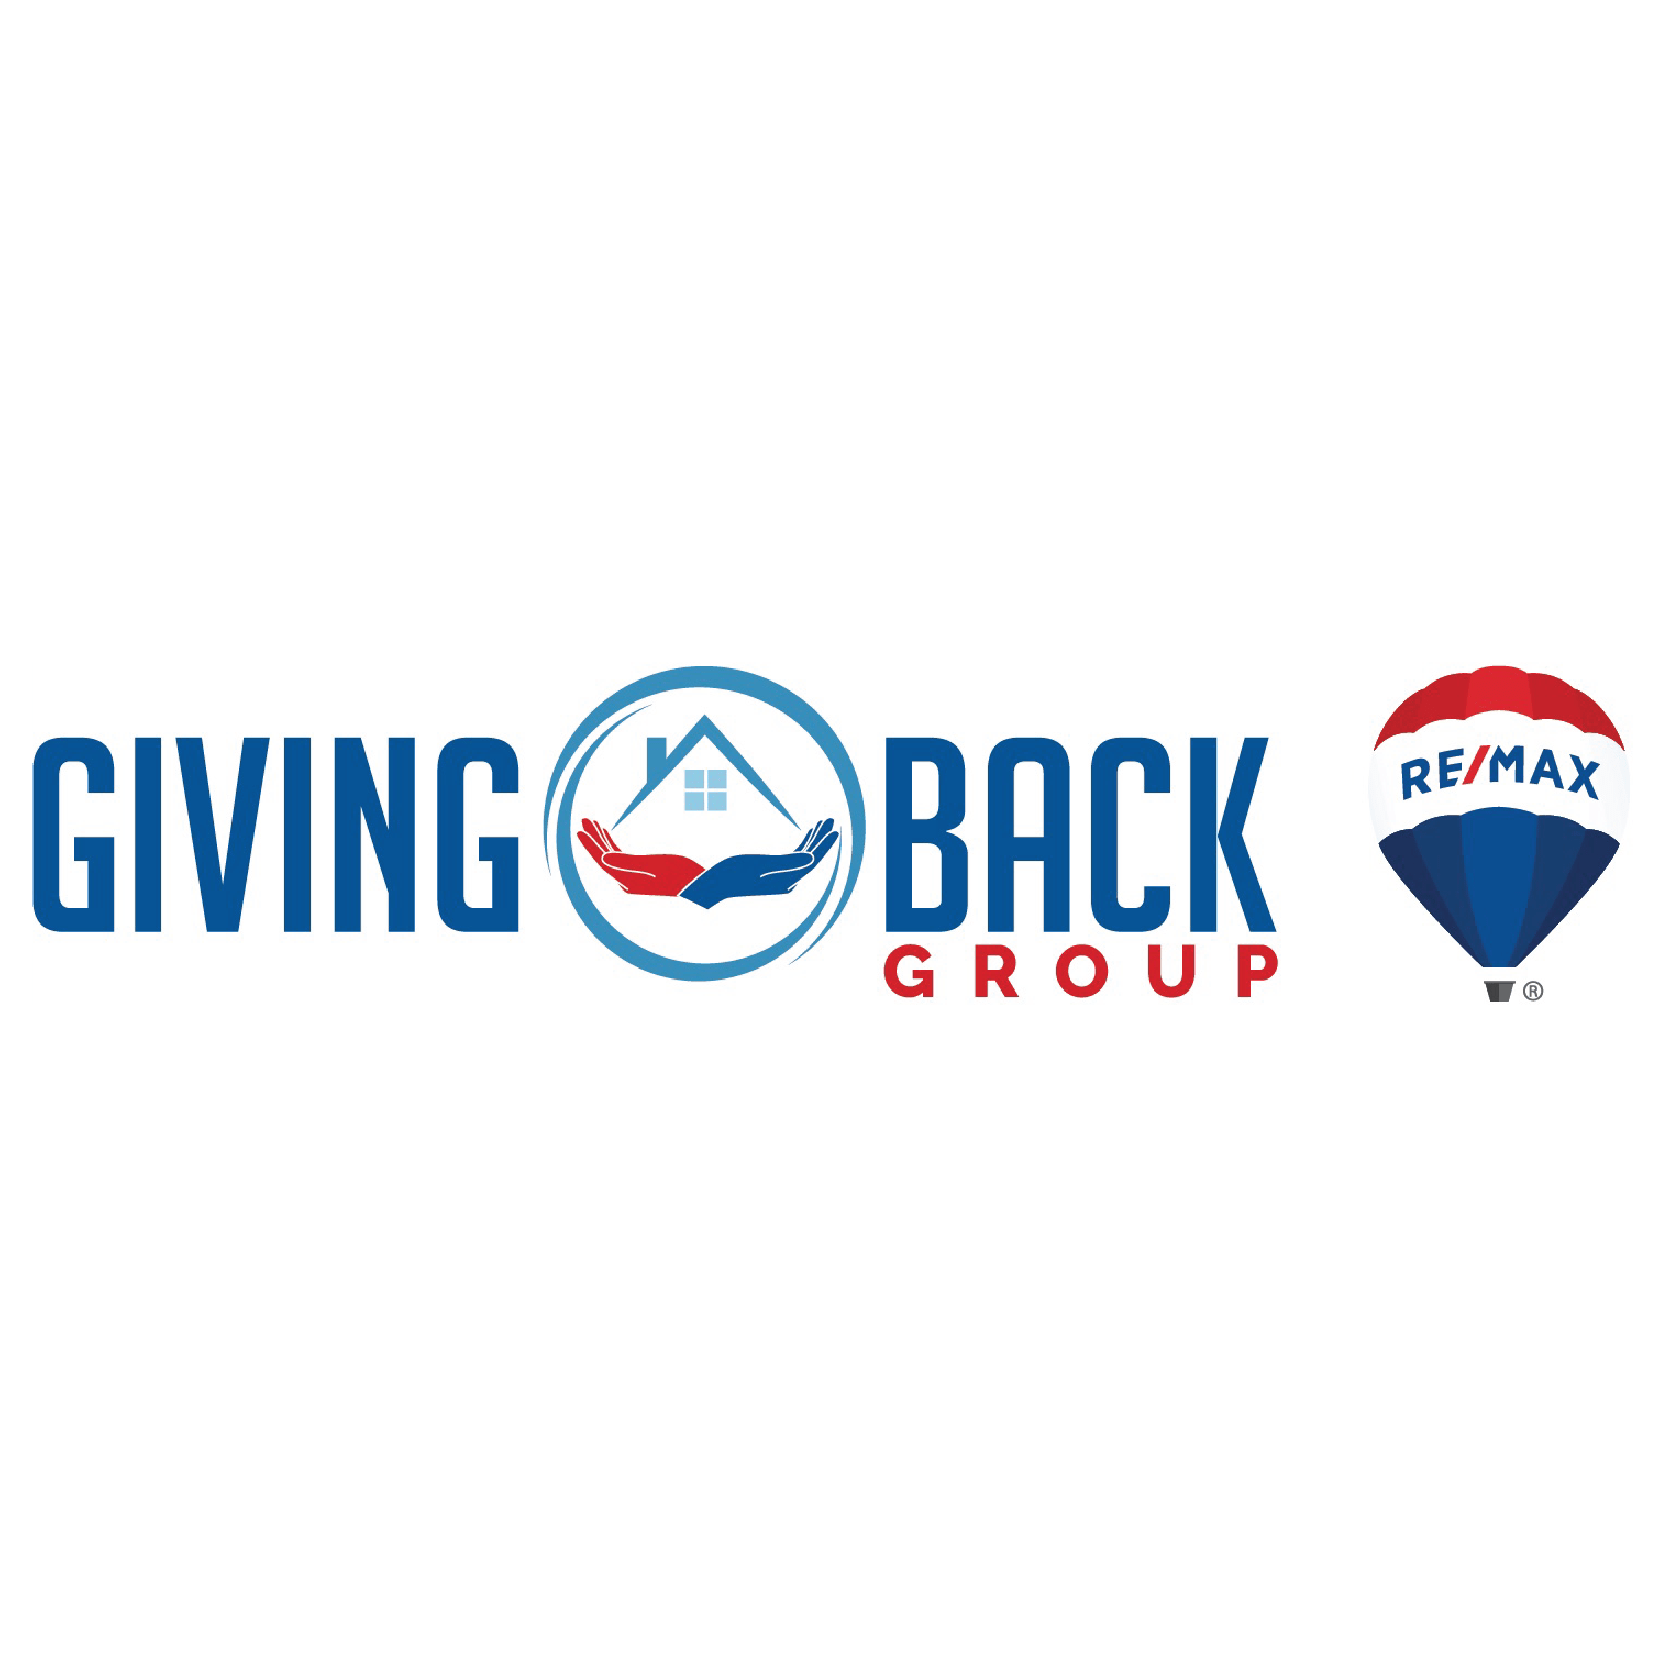 REMAX Giving Group